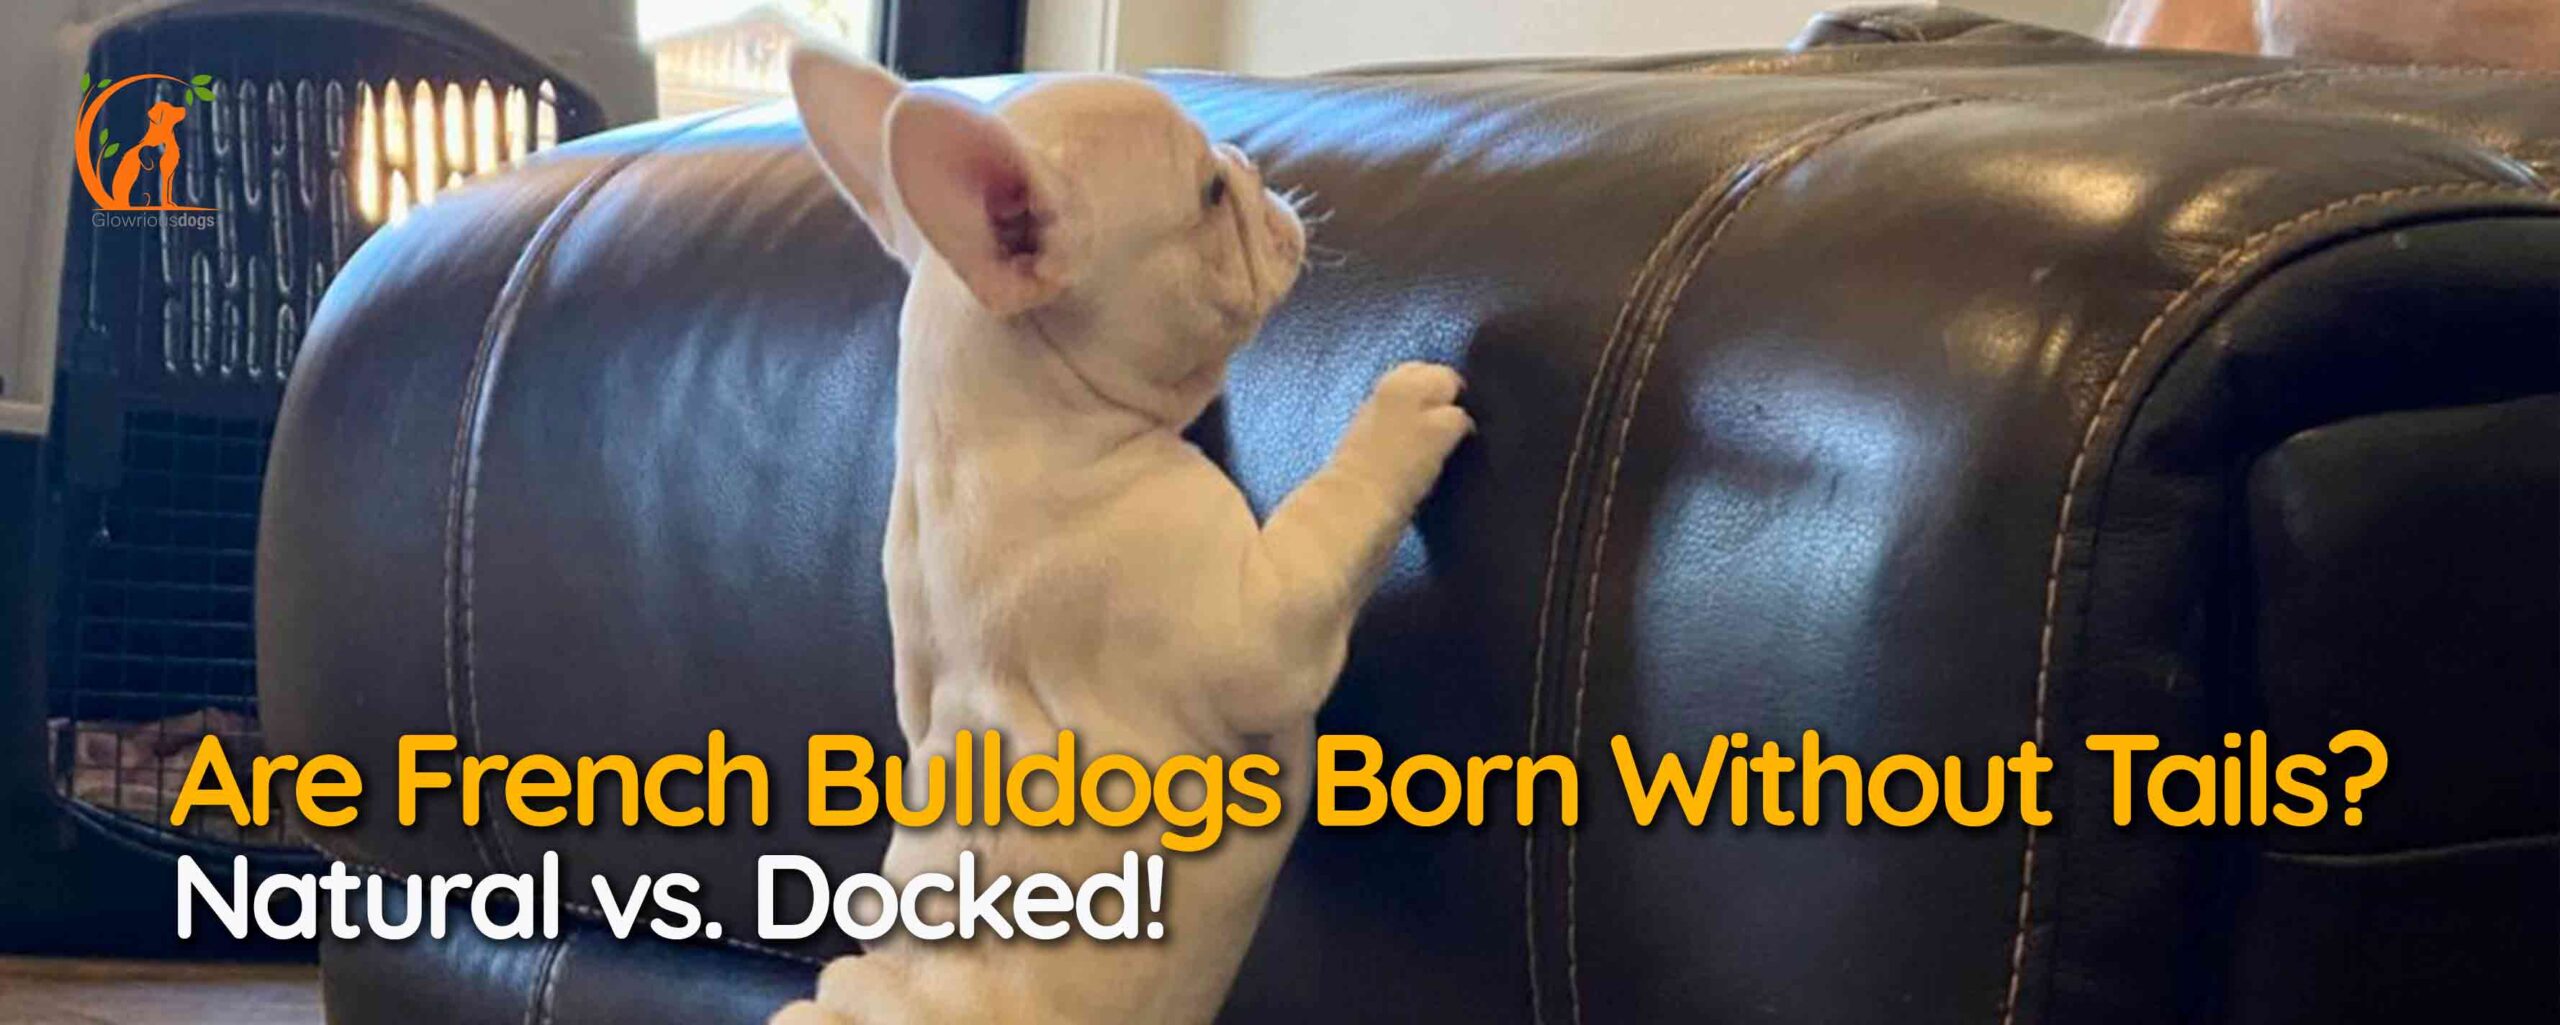 Are French Bulldogs Born Without Tails? Natural vs. Docked!